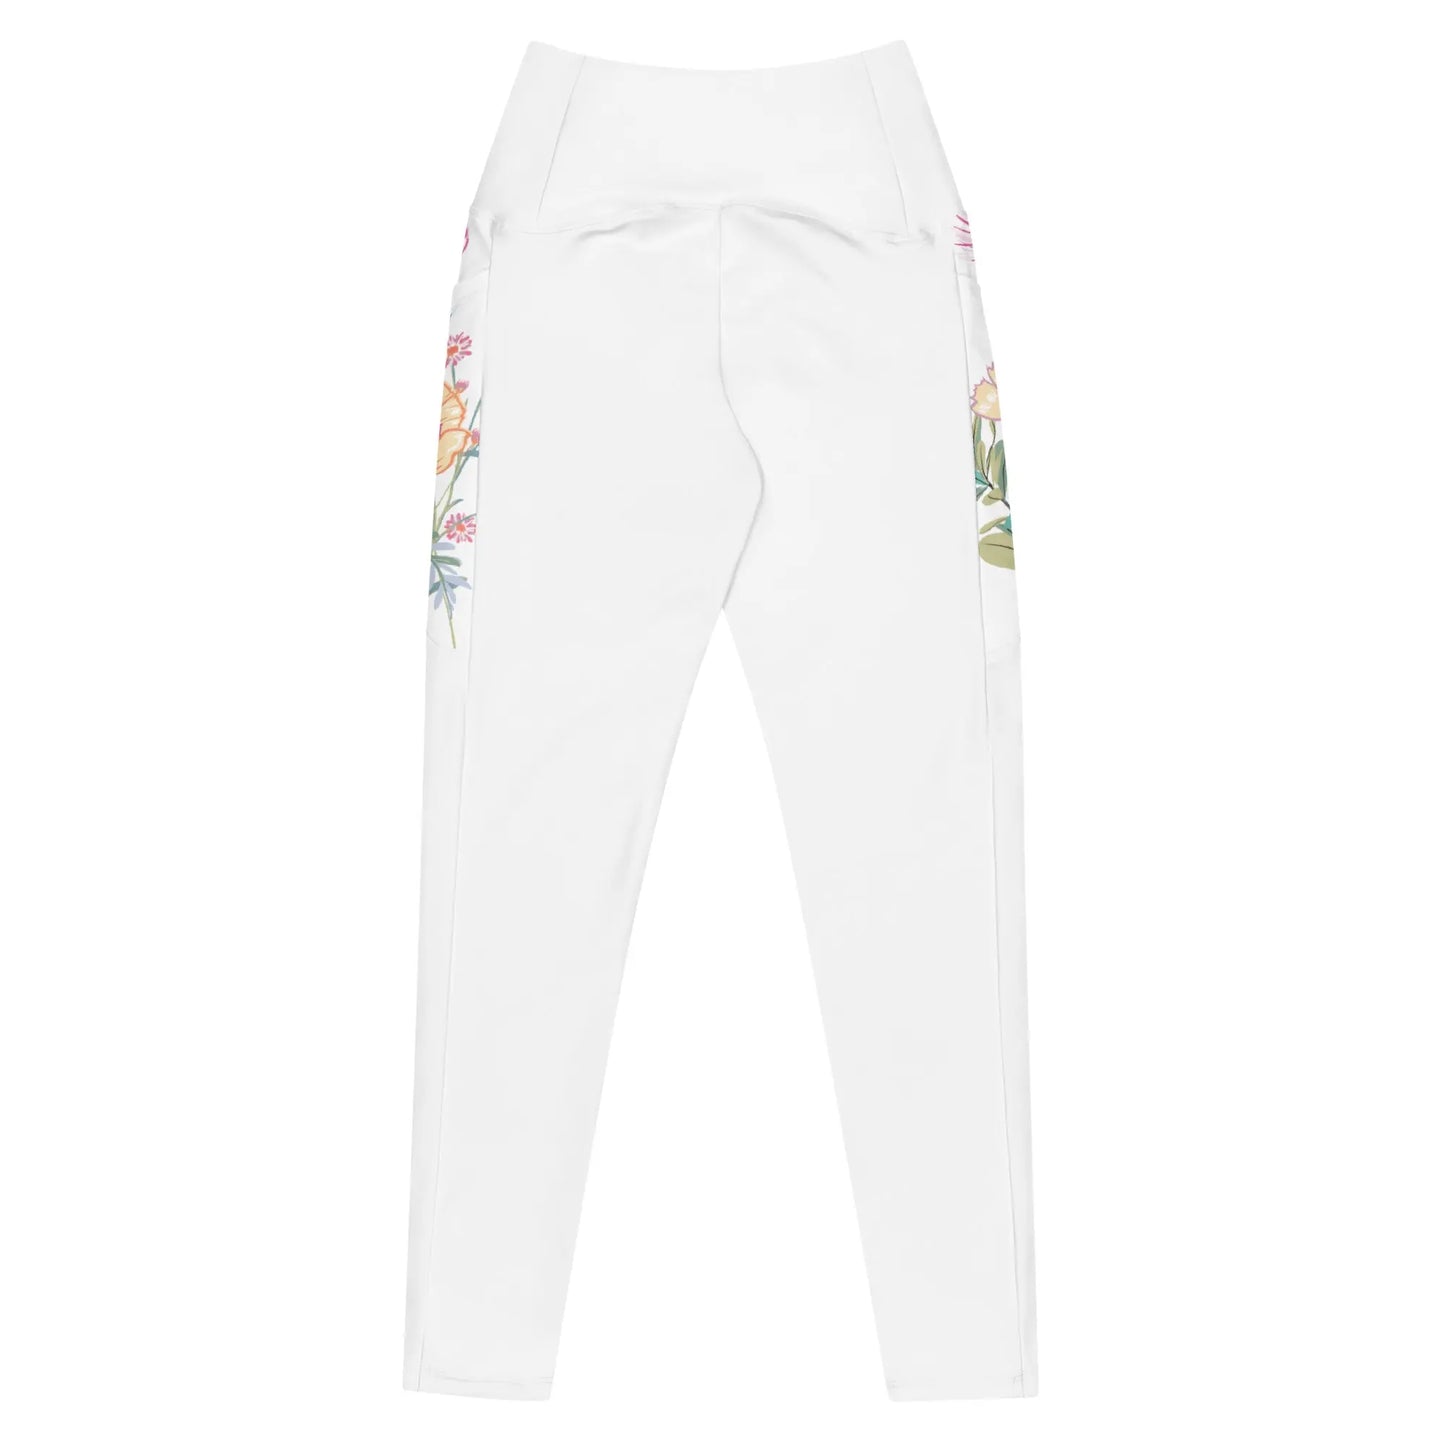 White Leggings with pockets and Floral Details Ellie Day Activewear